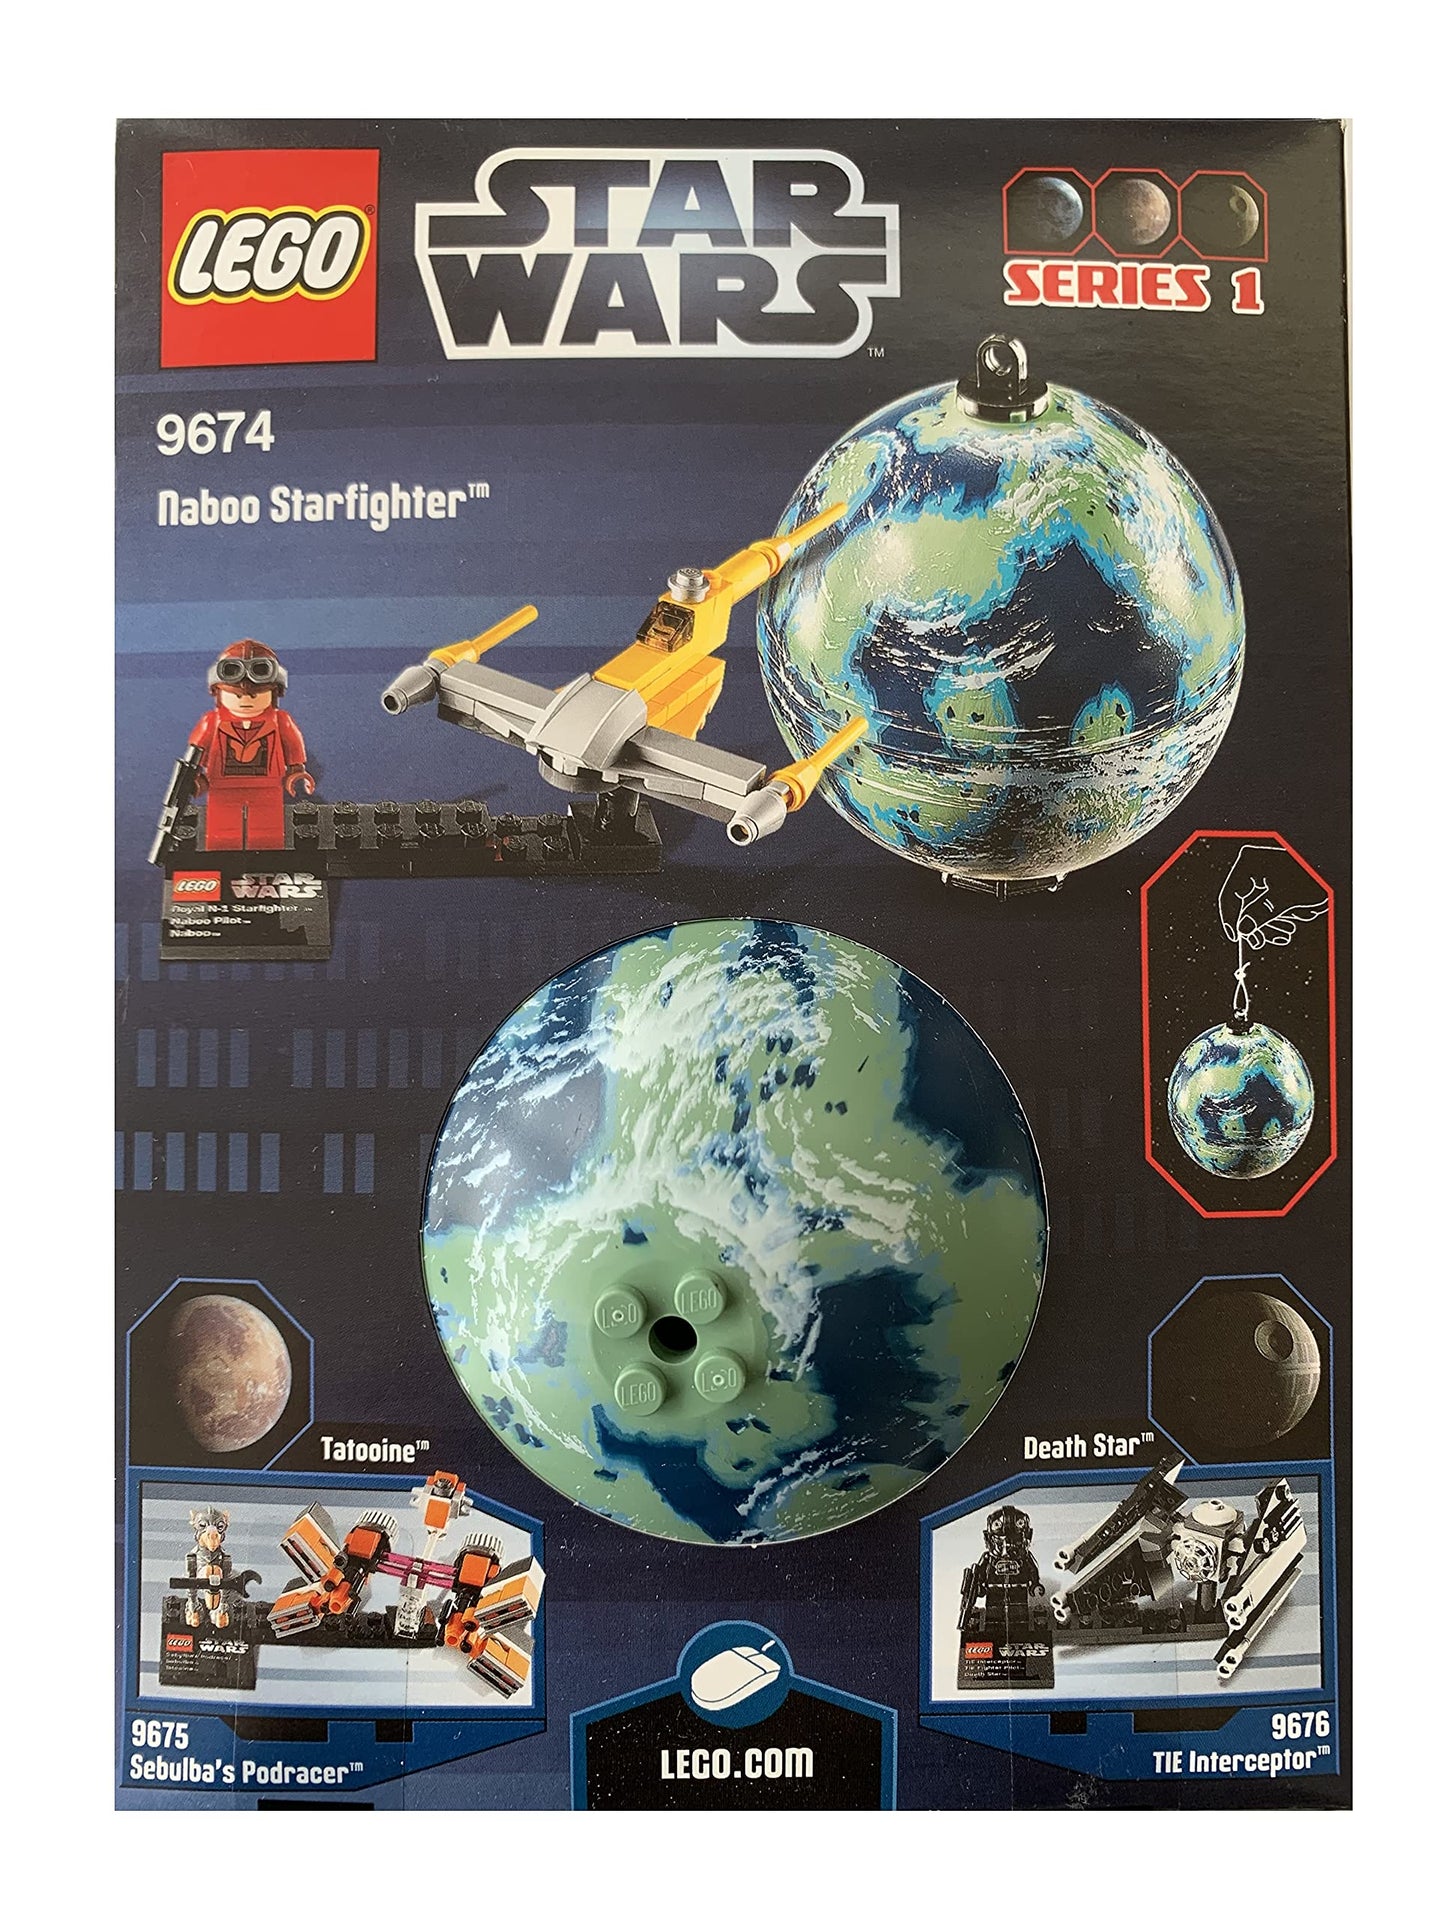 Vintage 2012 Star Wars Lego Series 1 No. 9674 - Naboo Starfighter And Naboo Planet Set - Brand New Factory Sealed Shop Stock Room Find